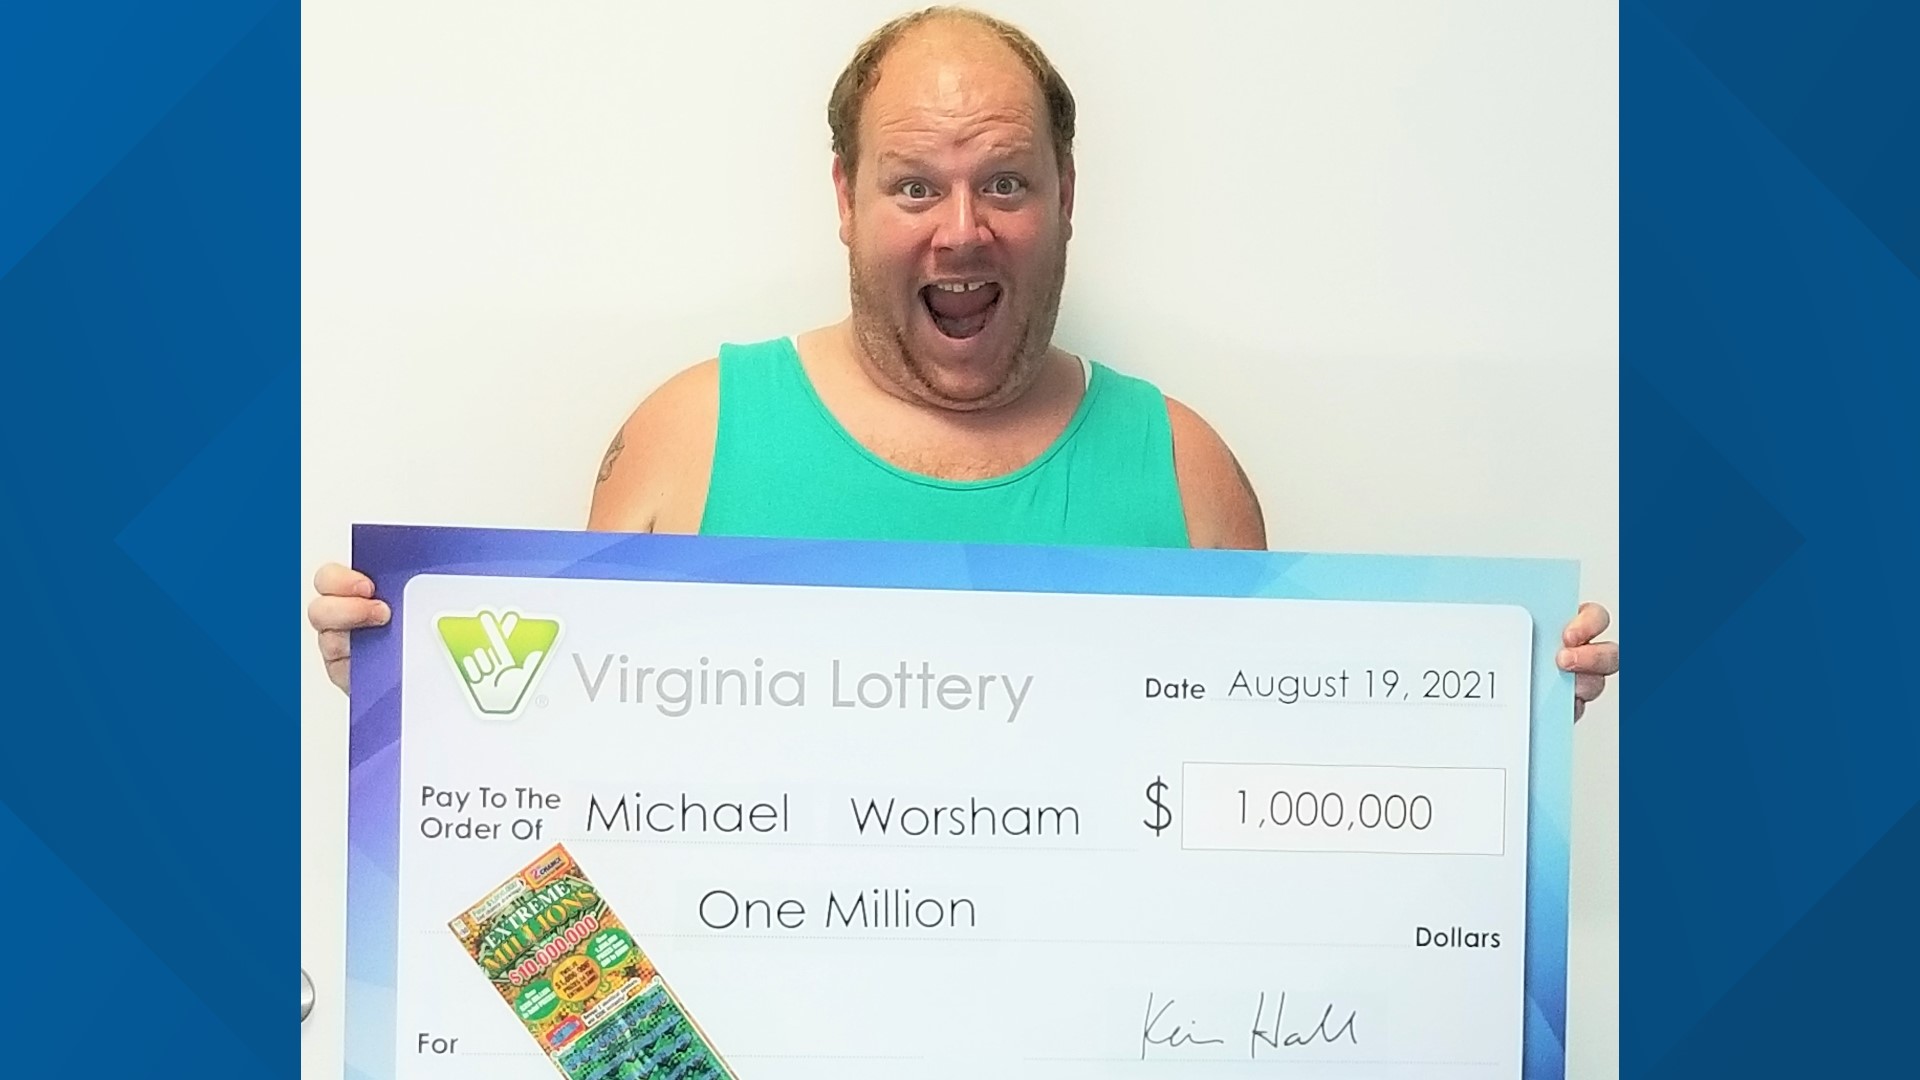 Man From Chesapeake Wins 1m From Virginia Lottery Hitting It Big For Second Time